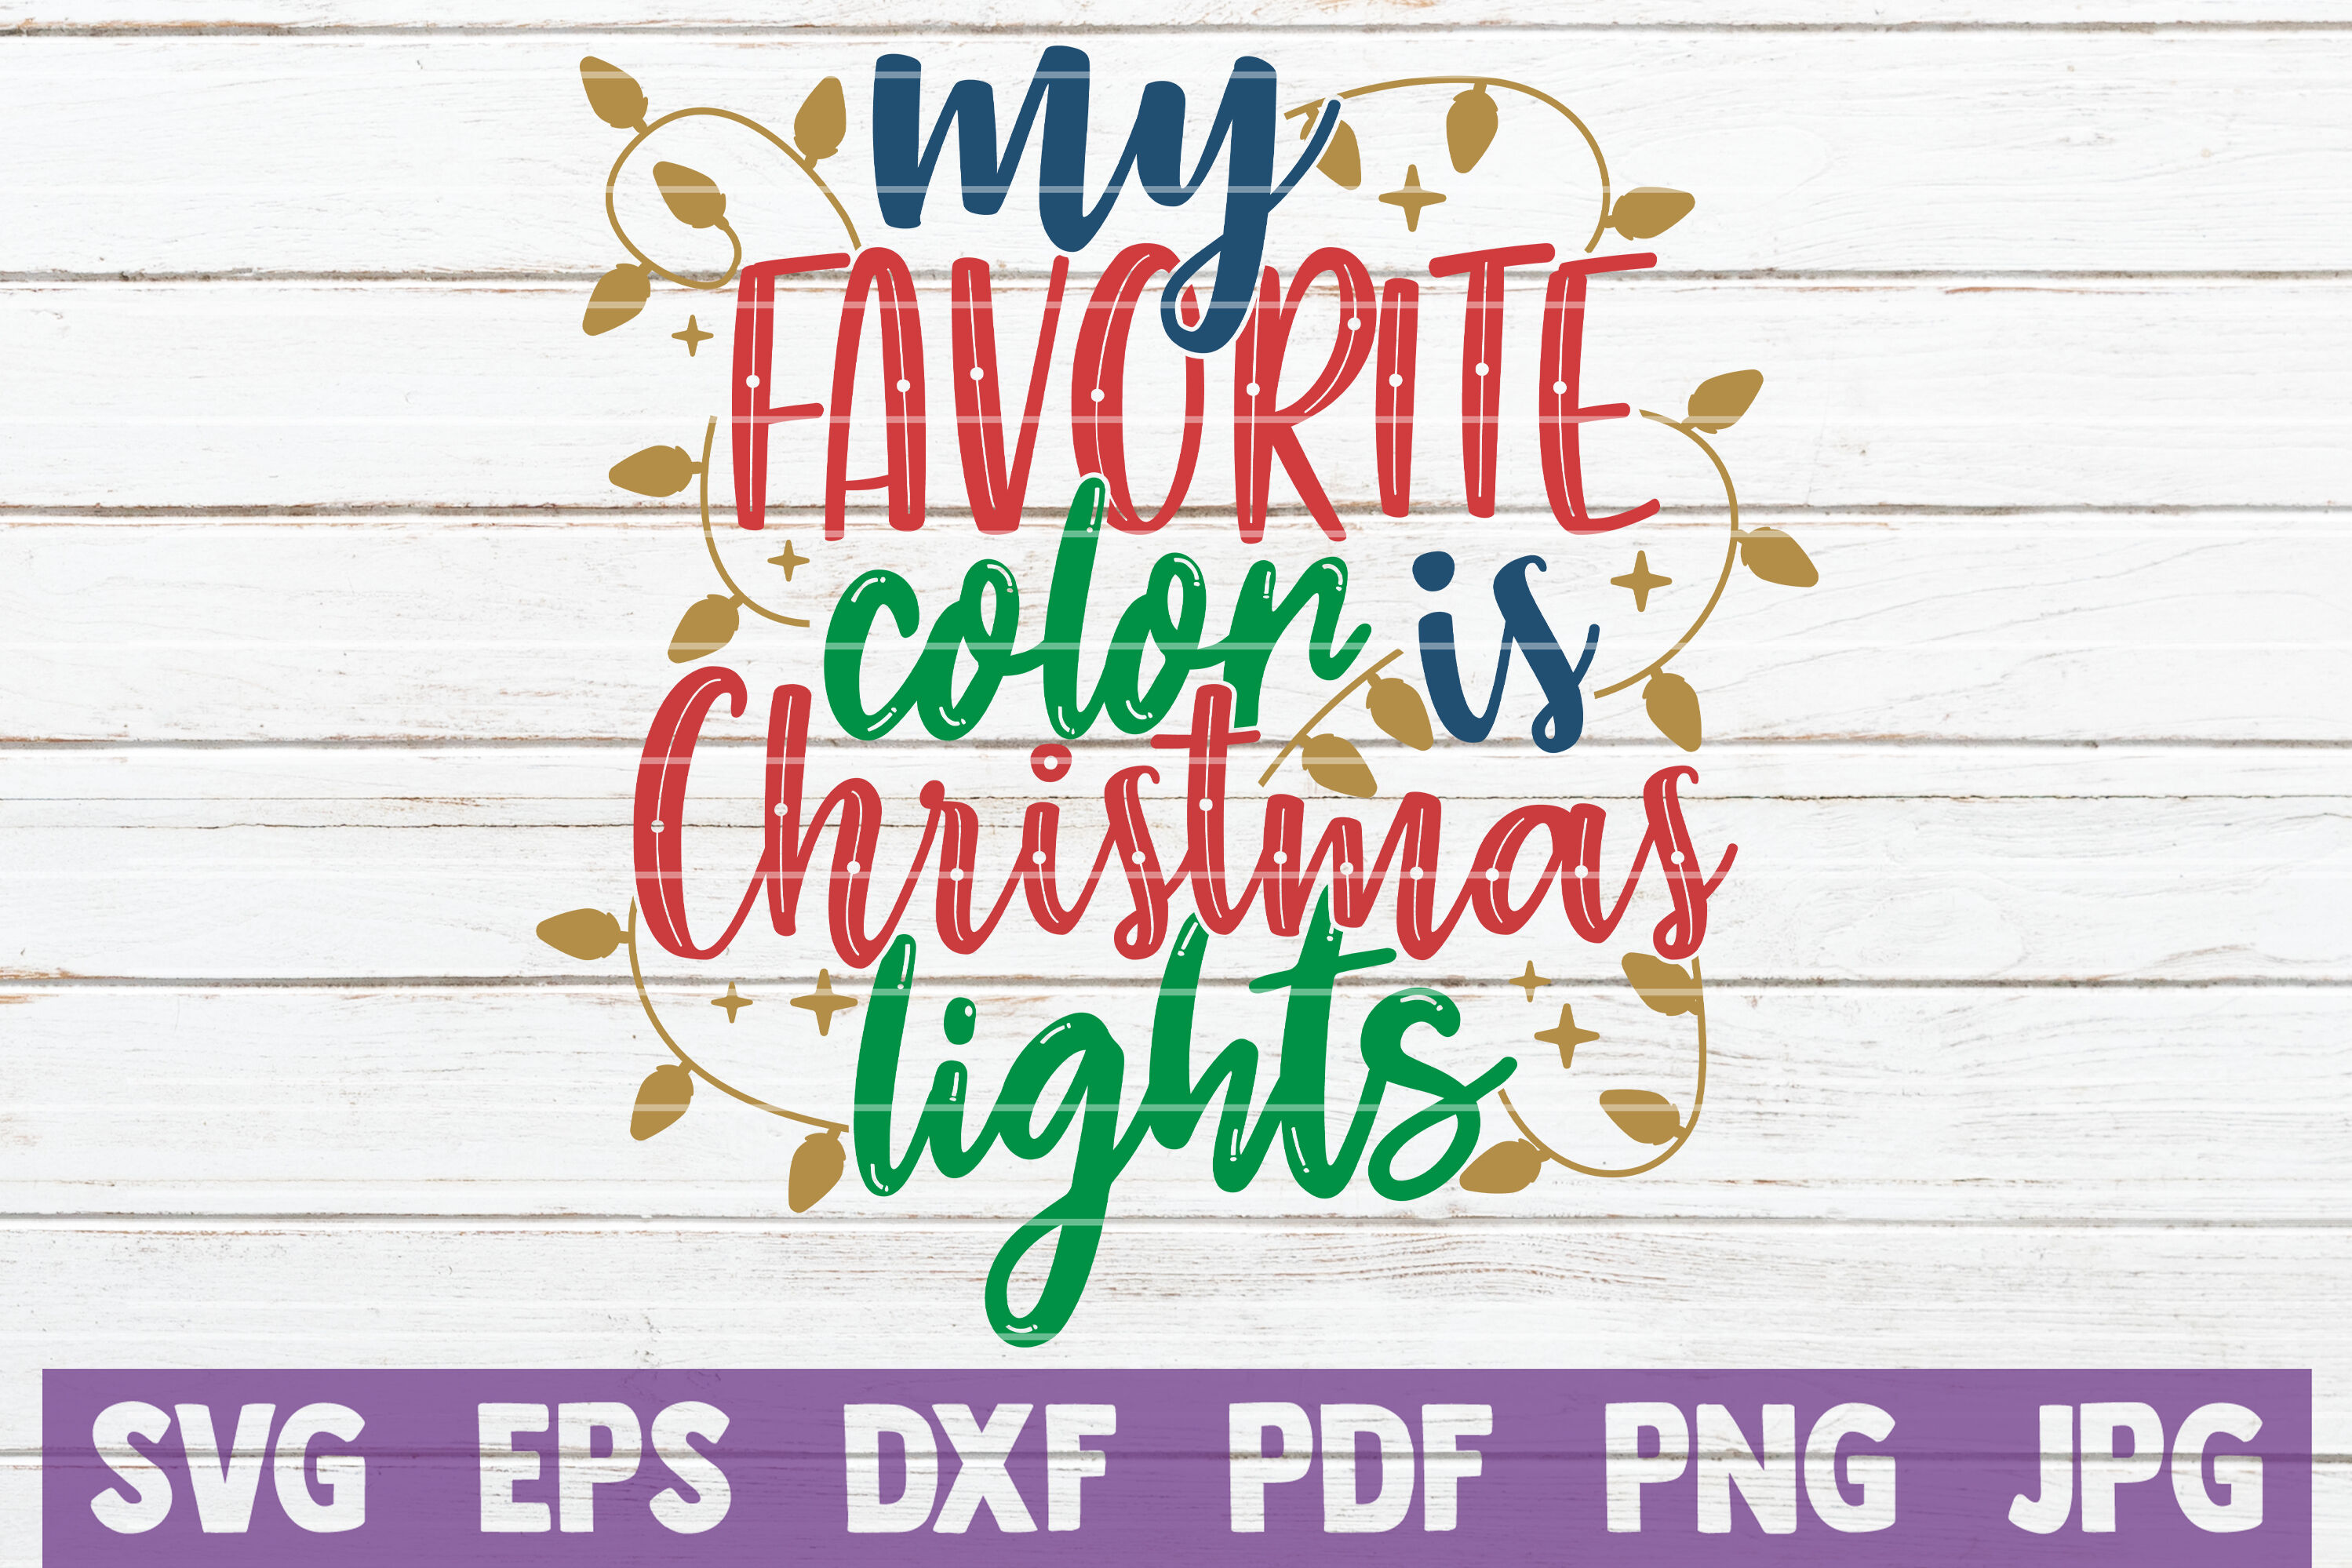 My Favorite Color Is Christmas Lights Svg Cut File By Mintymarshmallows Thehungryjpeg Com